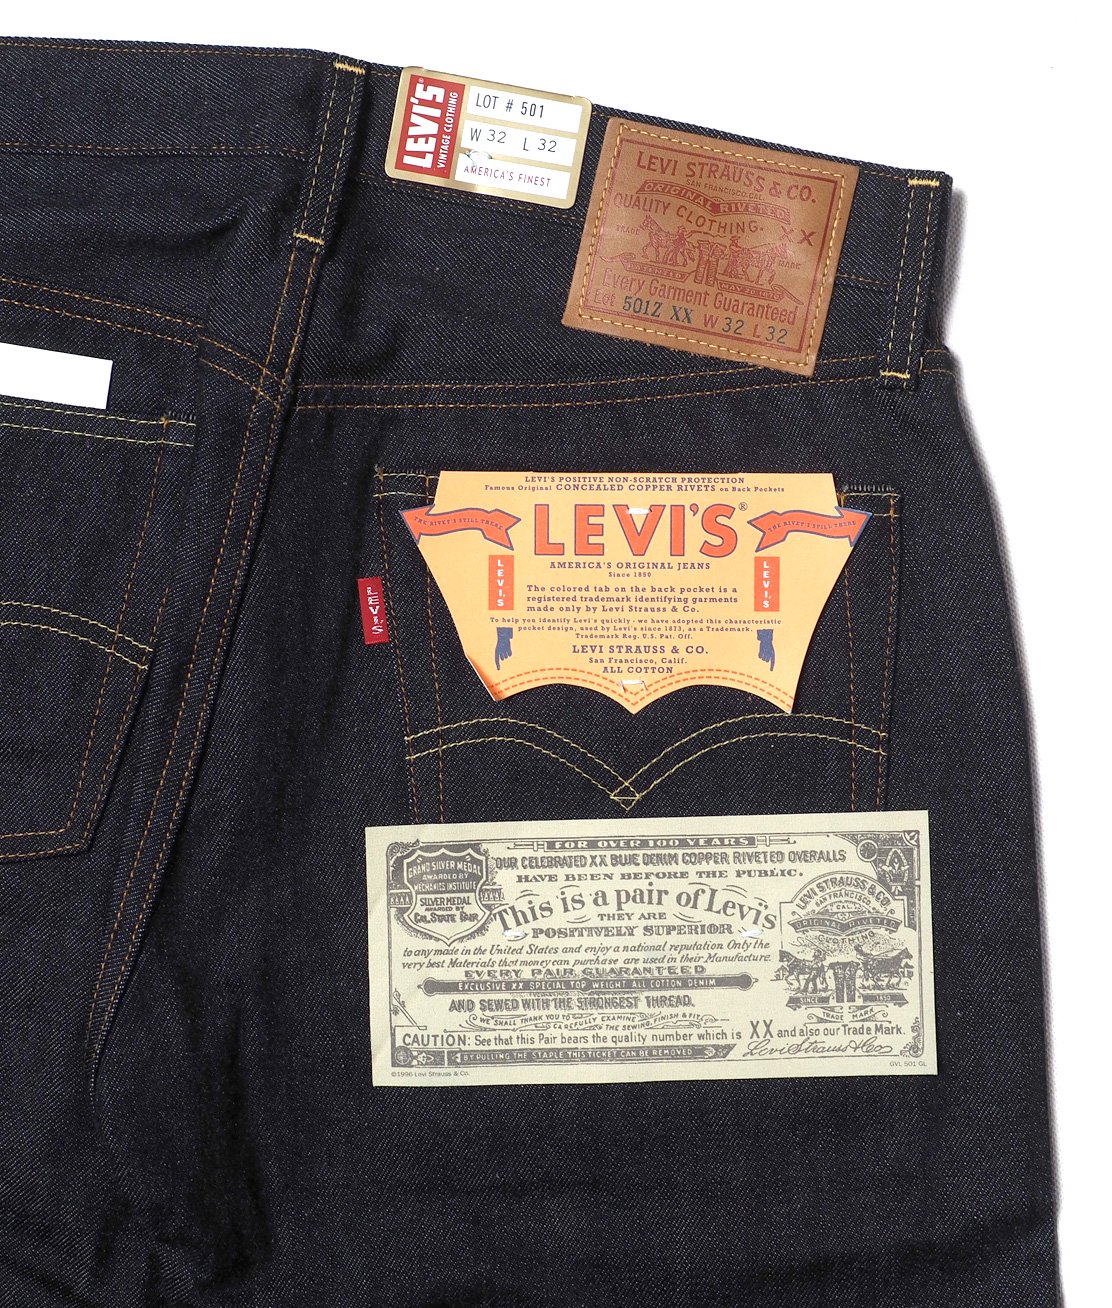 【LEVI'S VINTAGE CLOTHING】1954 501ZXX JEANS - RIGID カイハラデニム ジーンズ リーバイス -  HUNKY DORY